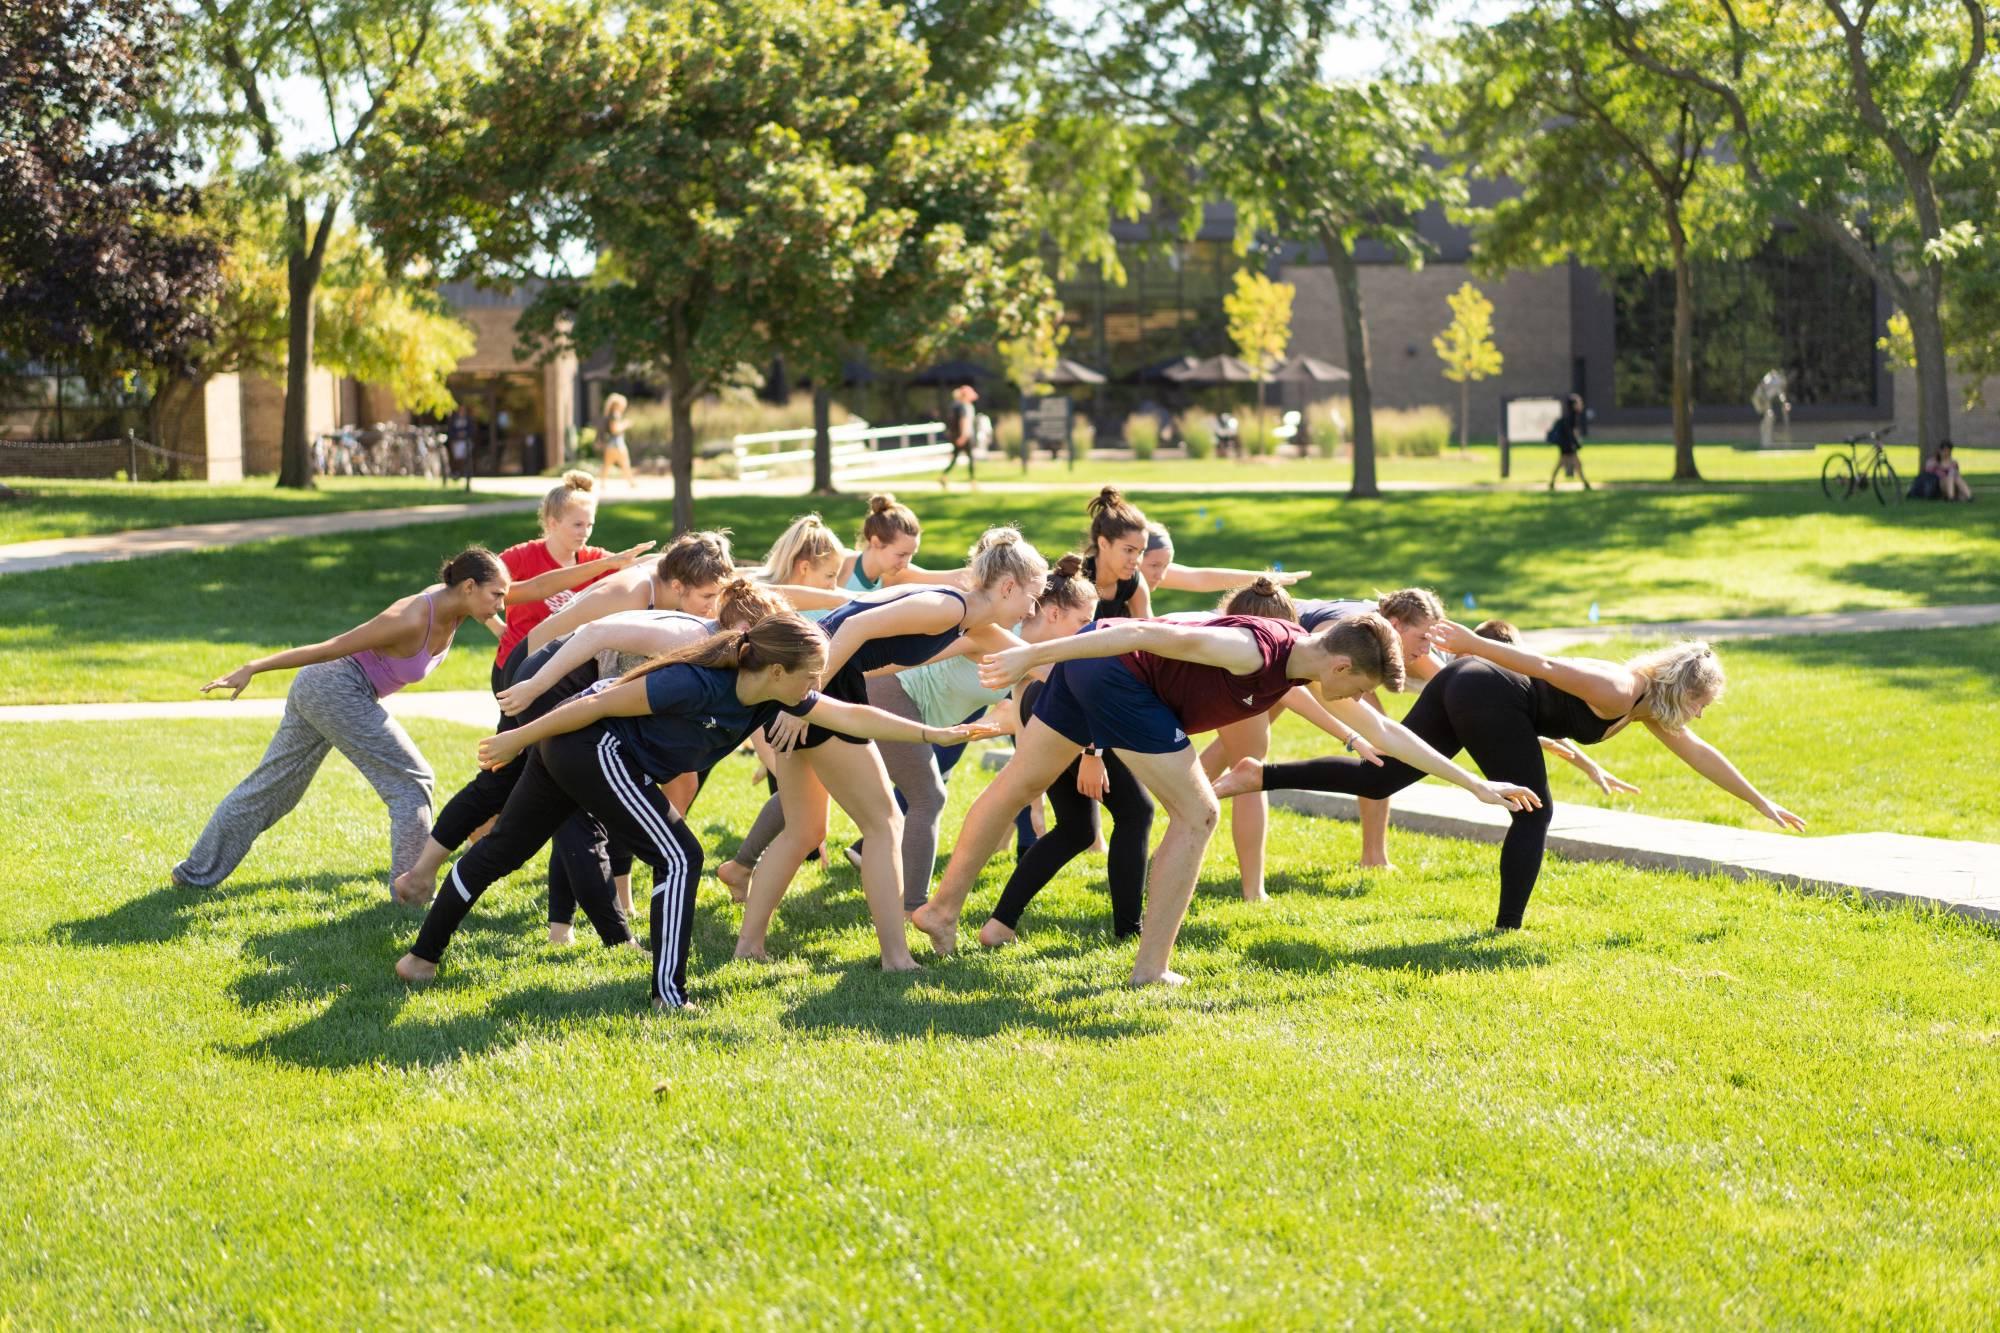 Dance students outdoors performing a group dance together